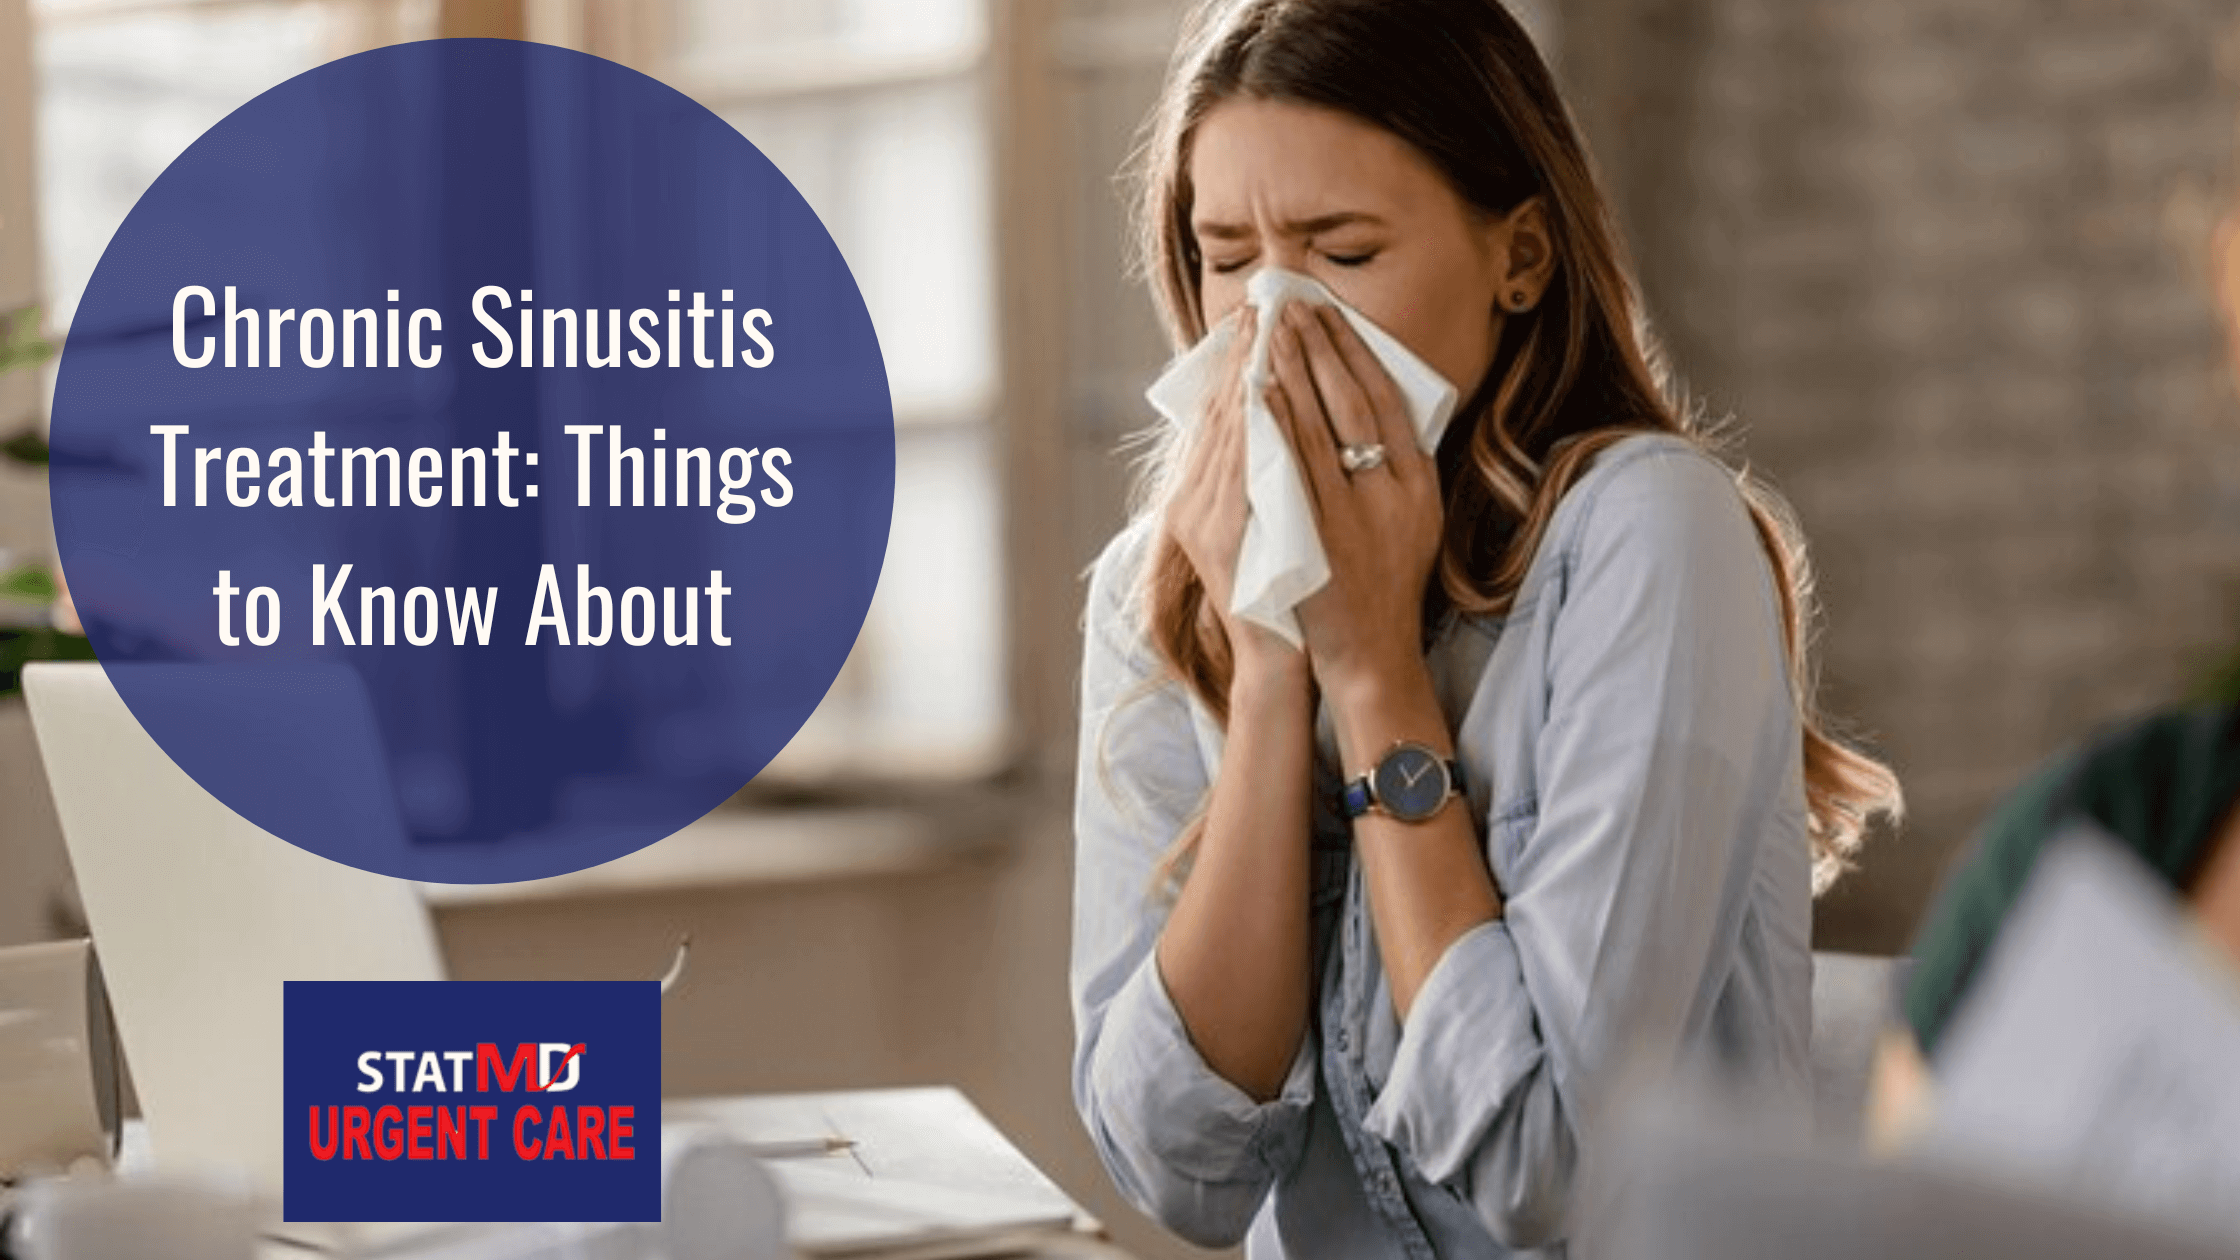 Chronic Sinusitis Treatment: Things to Know About